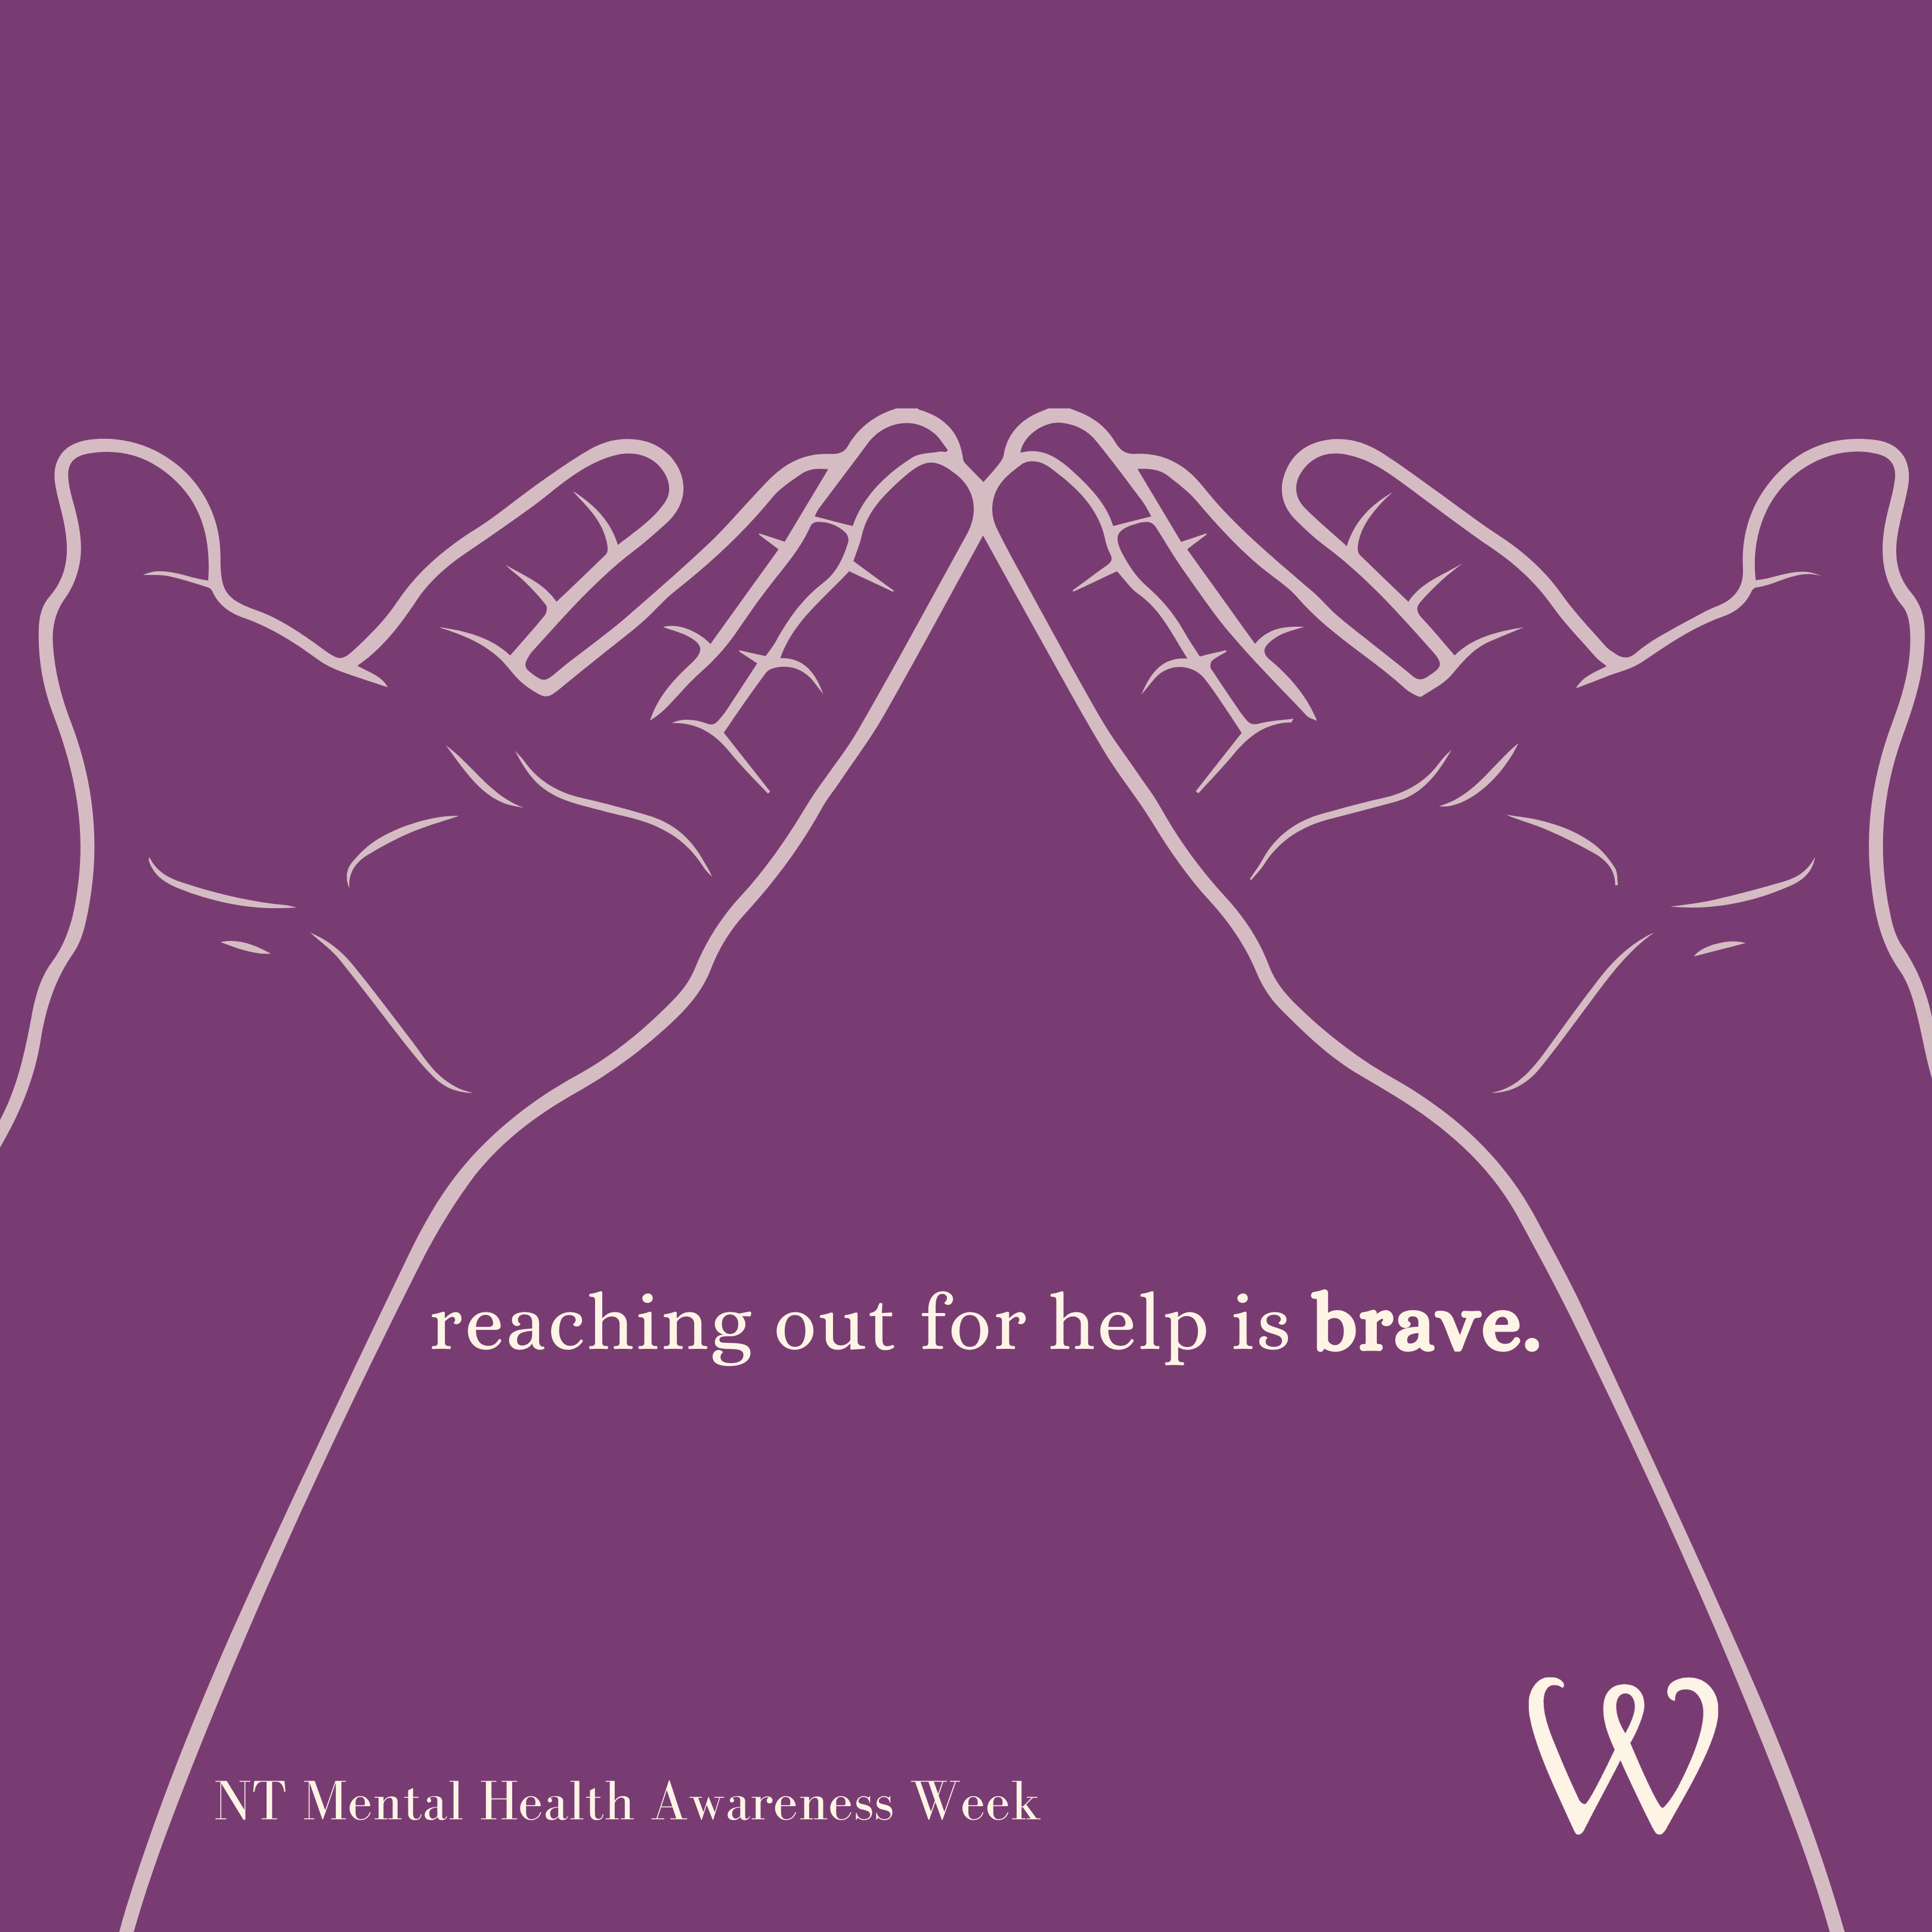 Mental Health Week Reaching Out For Help Is Brave Central Australian Womens Legal Service